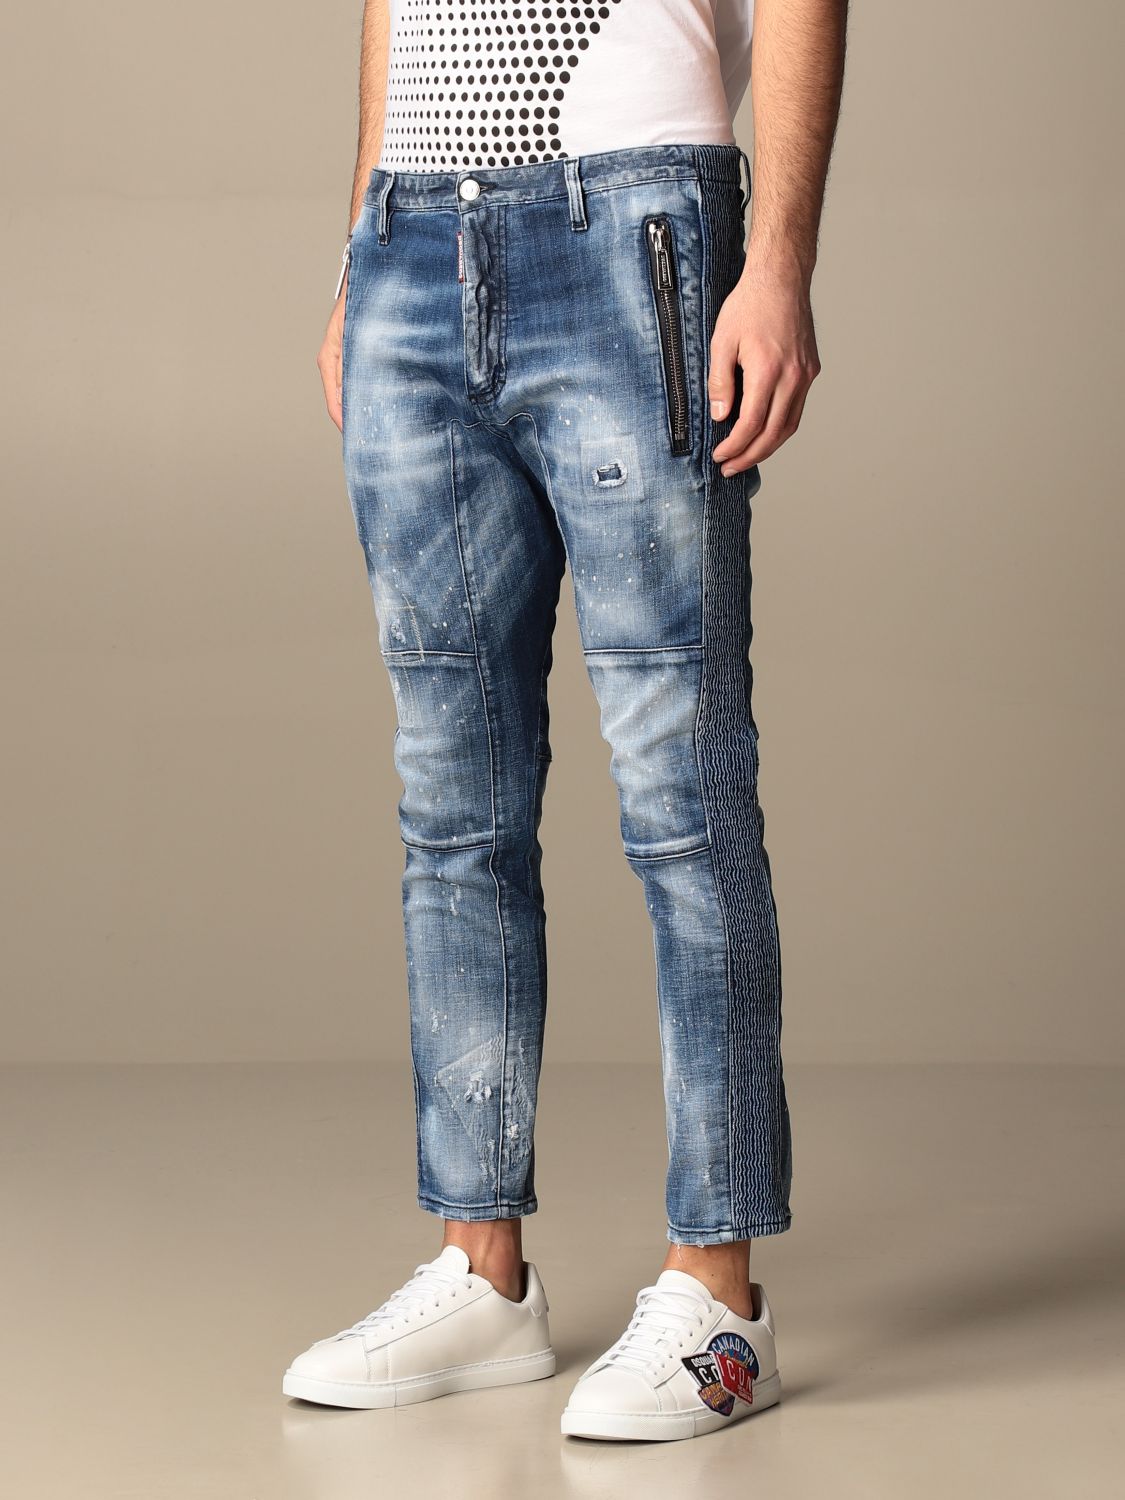 DSQUARED2: jeans in used denim with rips | Jeans Dsquared2 Men Blue ...